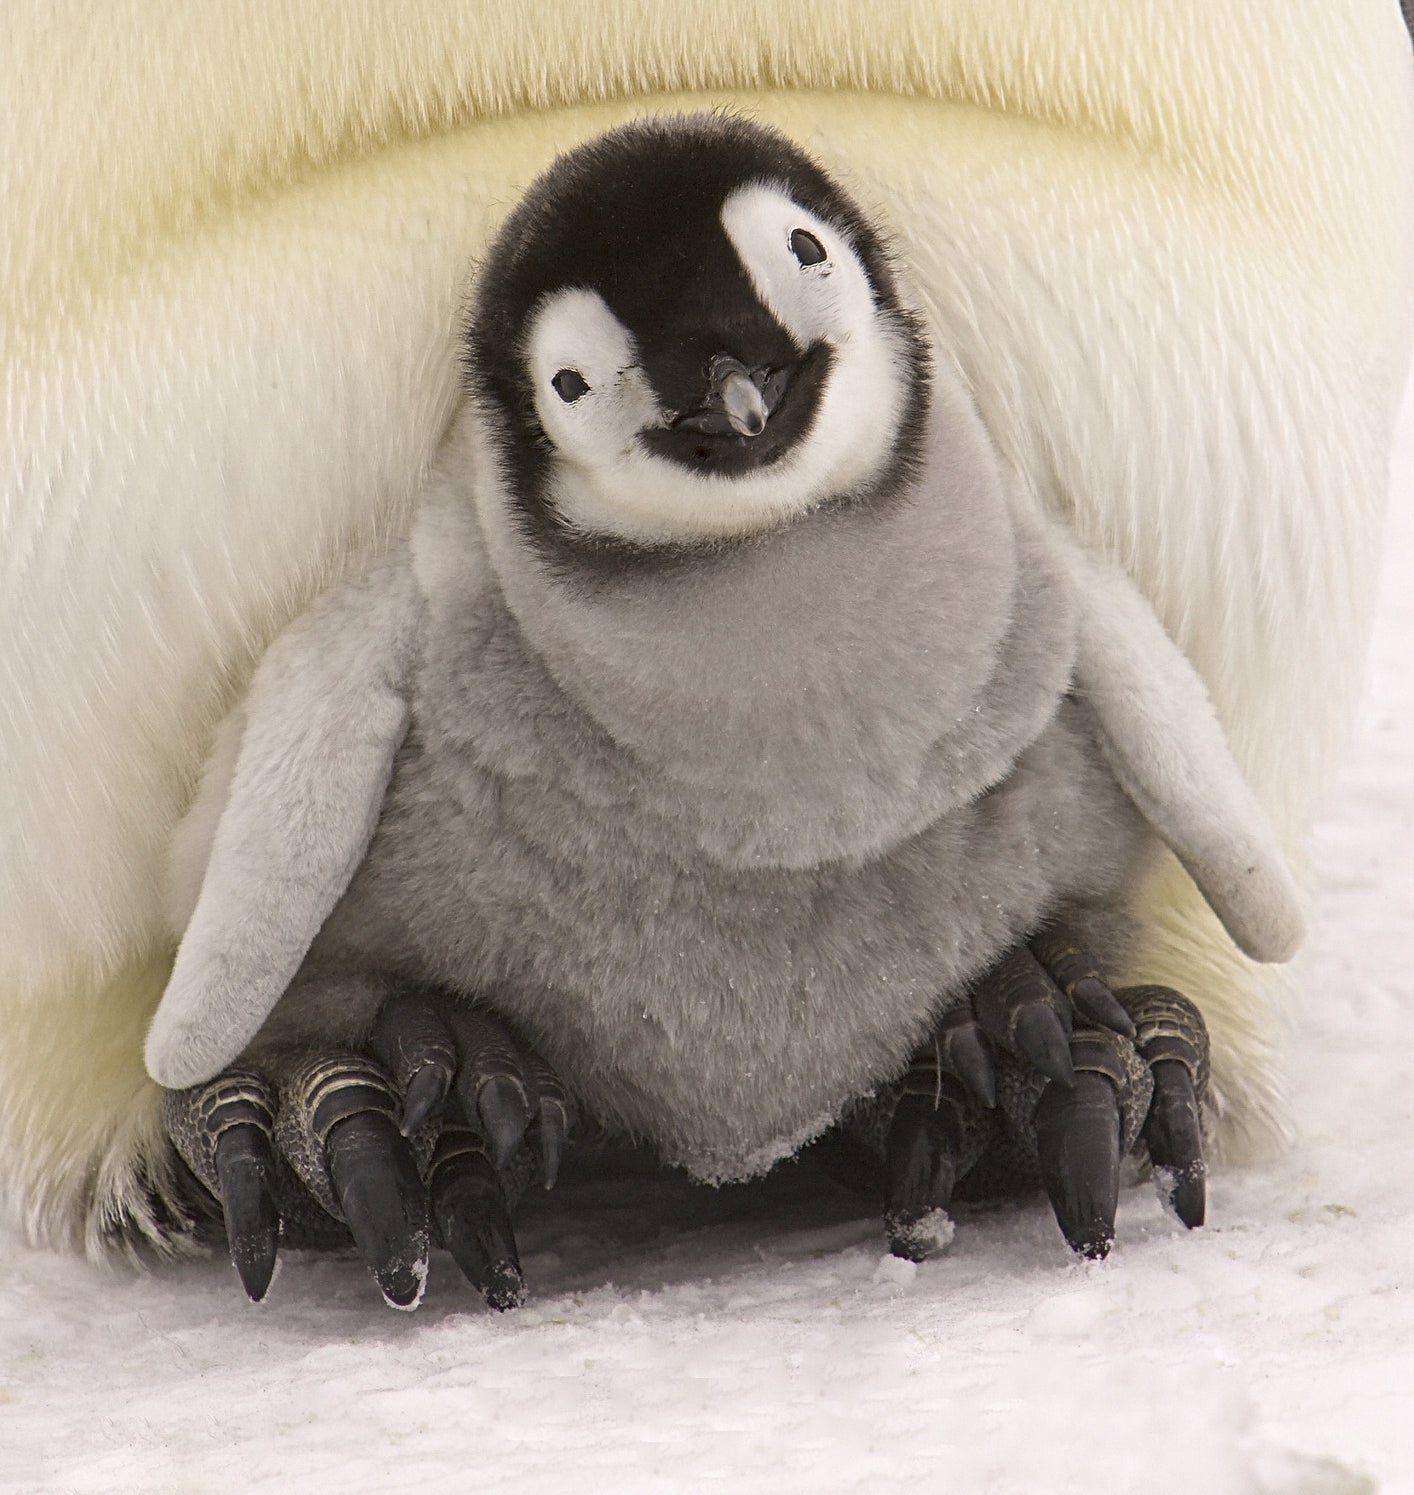 a penguin chick looking curious